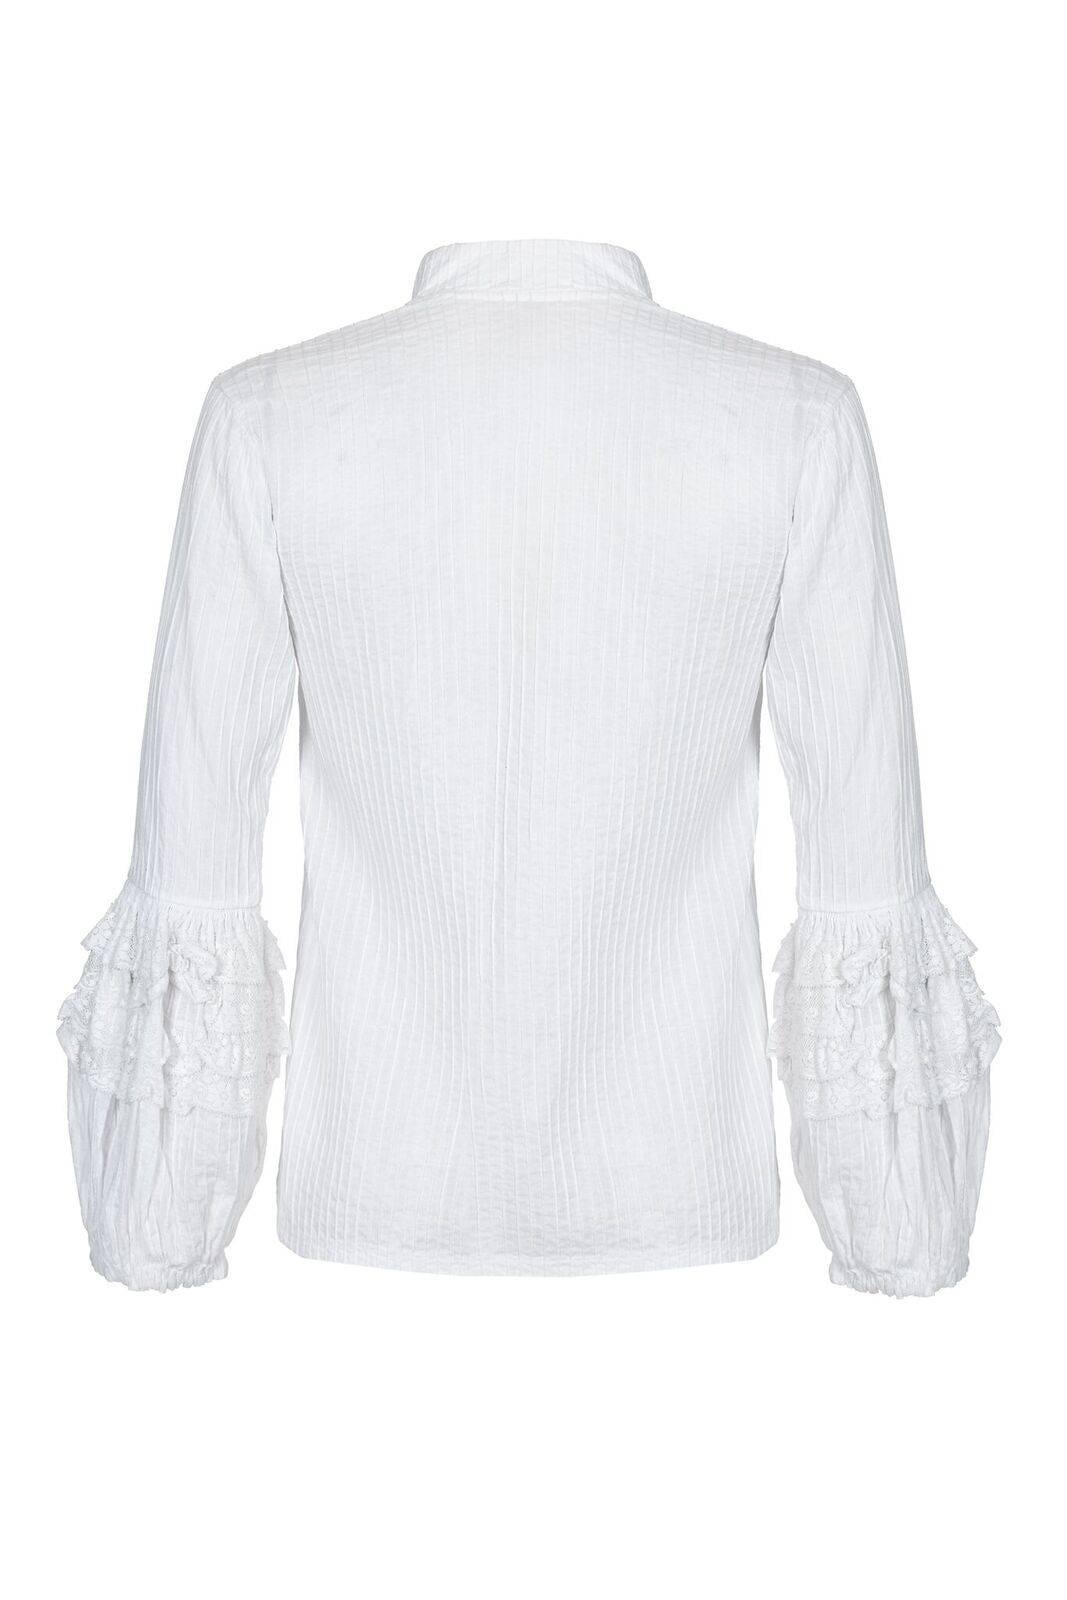 This romantic 1970s white cotton pin-tuck blouse with fantasy lace bubble sleeves is undoubtedly from the legendary Mexicana boutique but now has lost its labels.  Possibly designed by Tachi Castillo, this high quality blouse has a buttonless collar